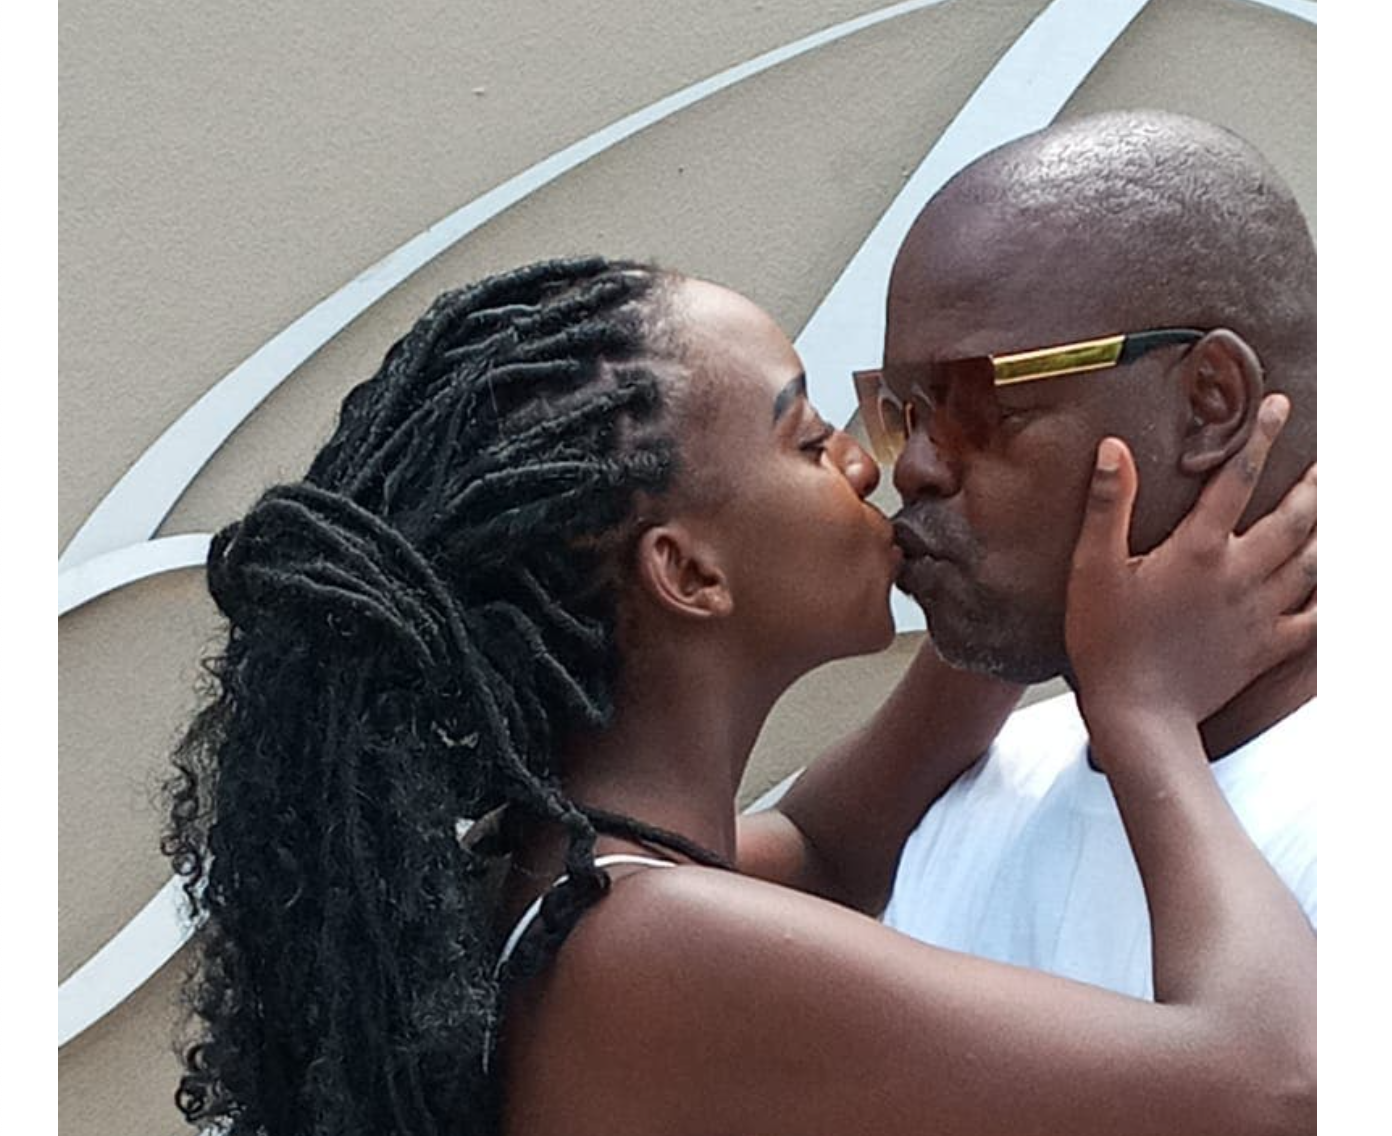 The River’s Mohumi Steamy Pictures With Younger Bae Ignite Controversy On Social Media